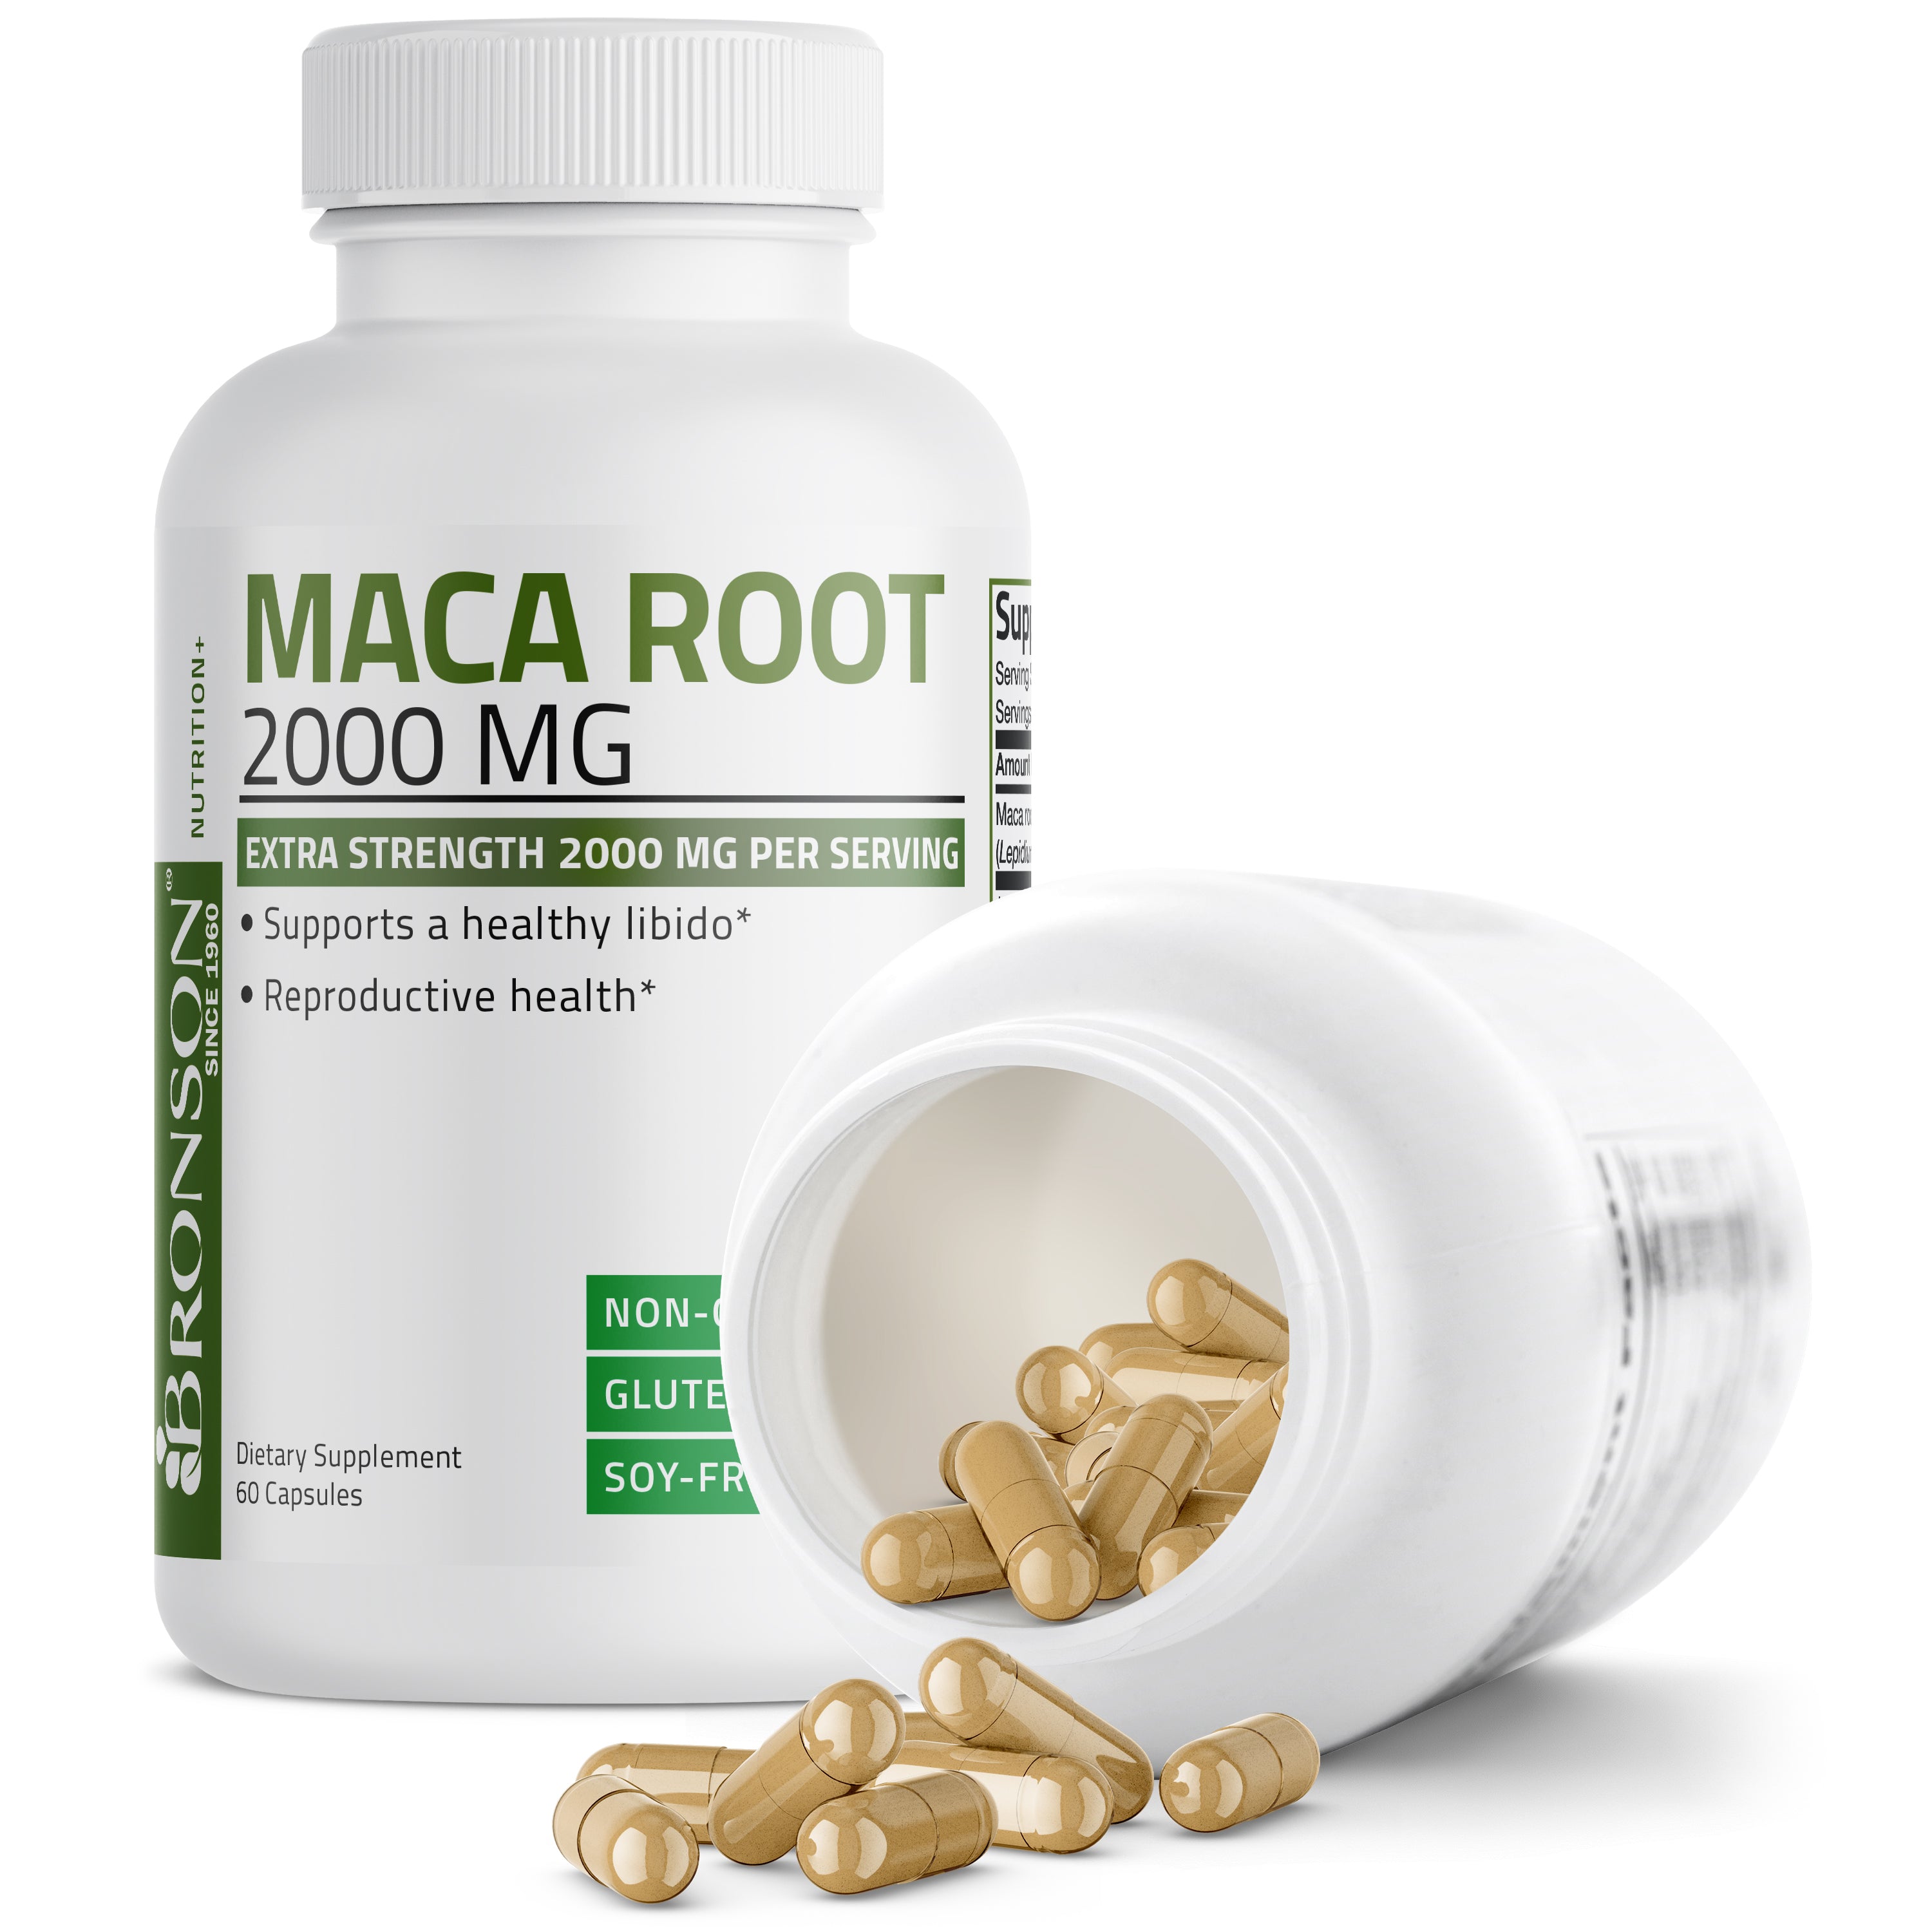 Maca Root Extra Strength - 2,000 mg view 15 of 6